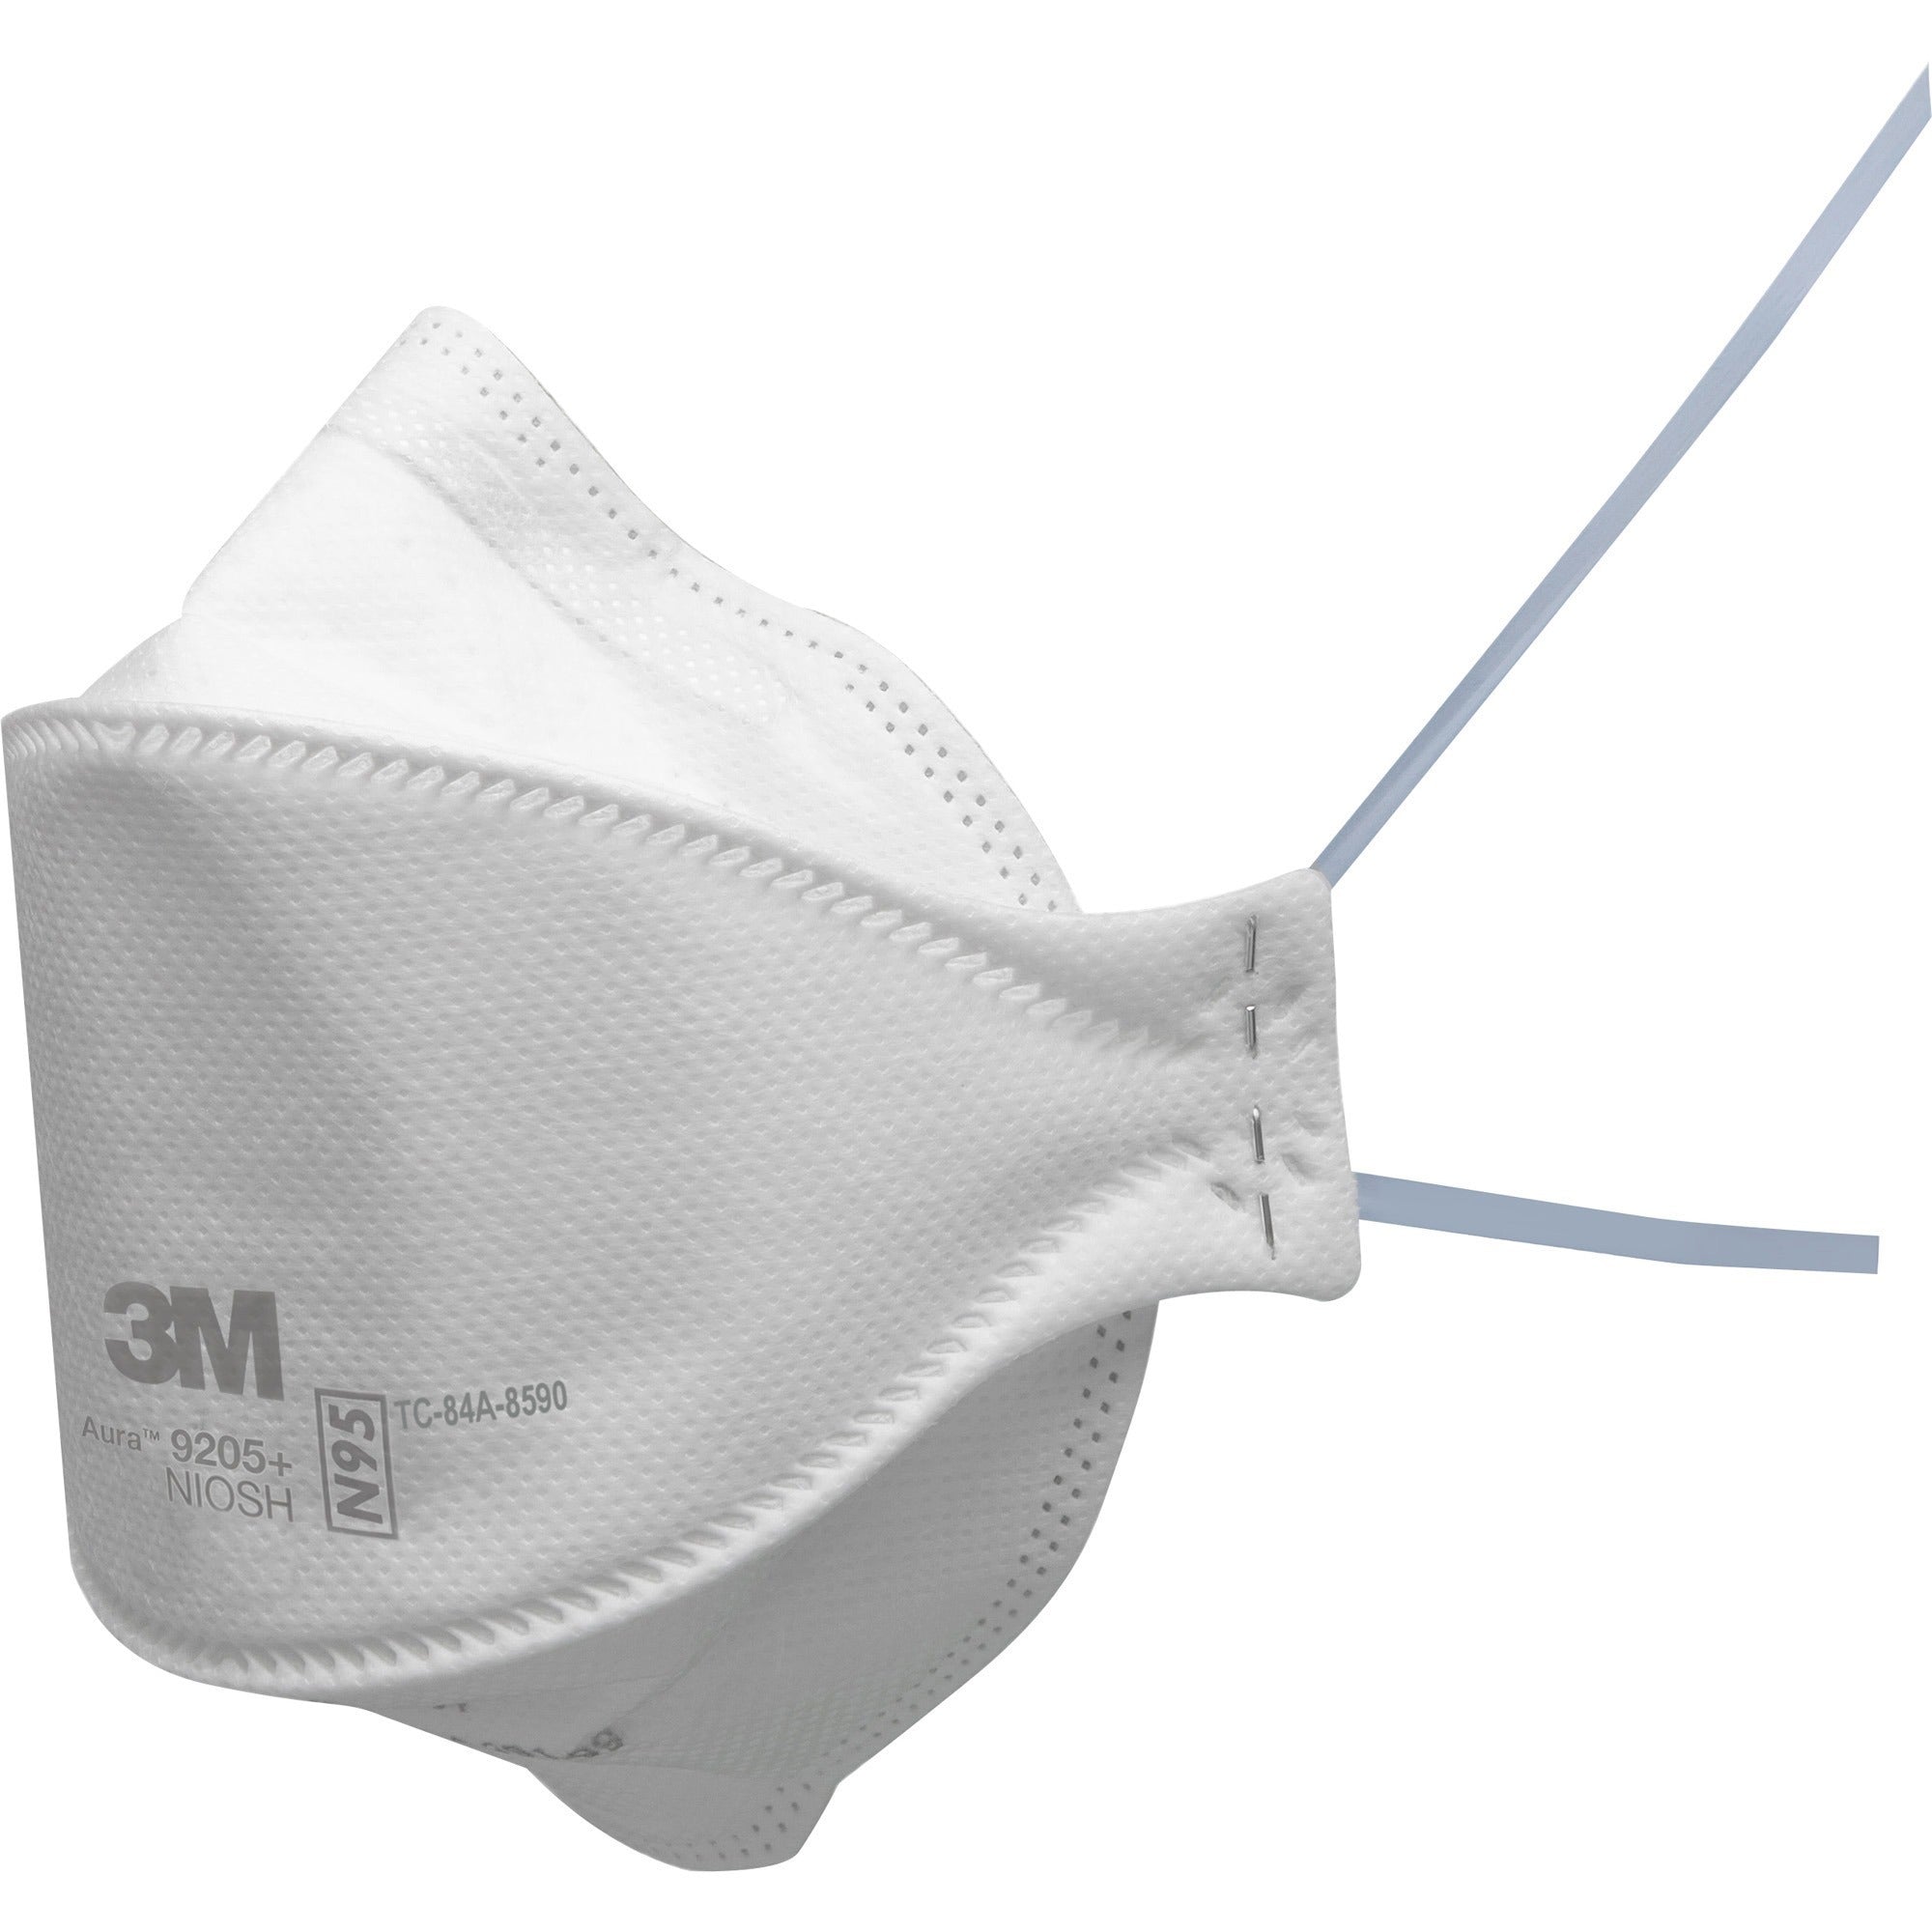 3m-aura-n95-particulate-respirator-9205-recommended-for-face-adult-size-airborne-particle-dust-contaminant-fog-protection-white-lightweight-soft-comfortable-adjustable-nose-clip-disposable-advanced-electret-media-10-pack_mmm9205p10dc - 3